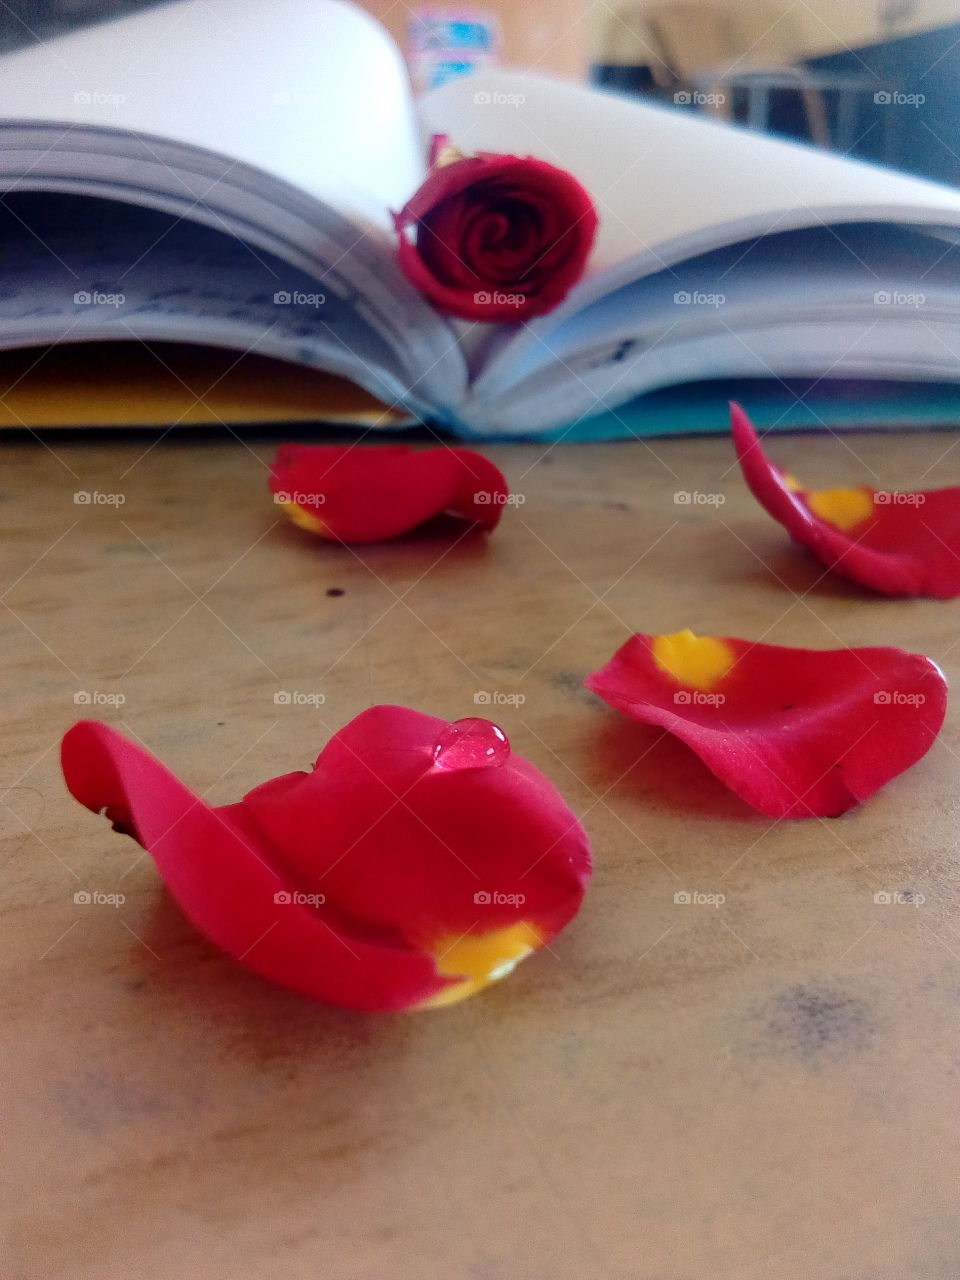 Rose between book pages